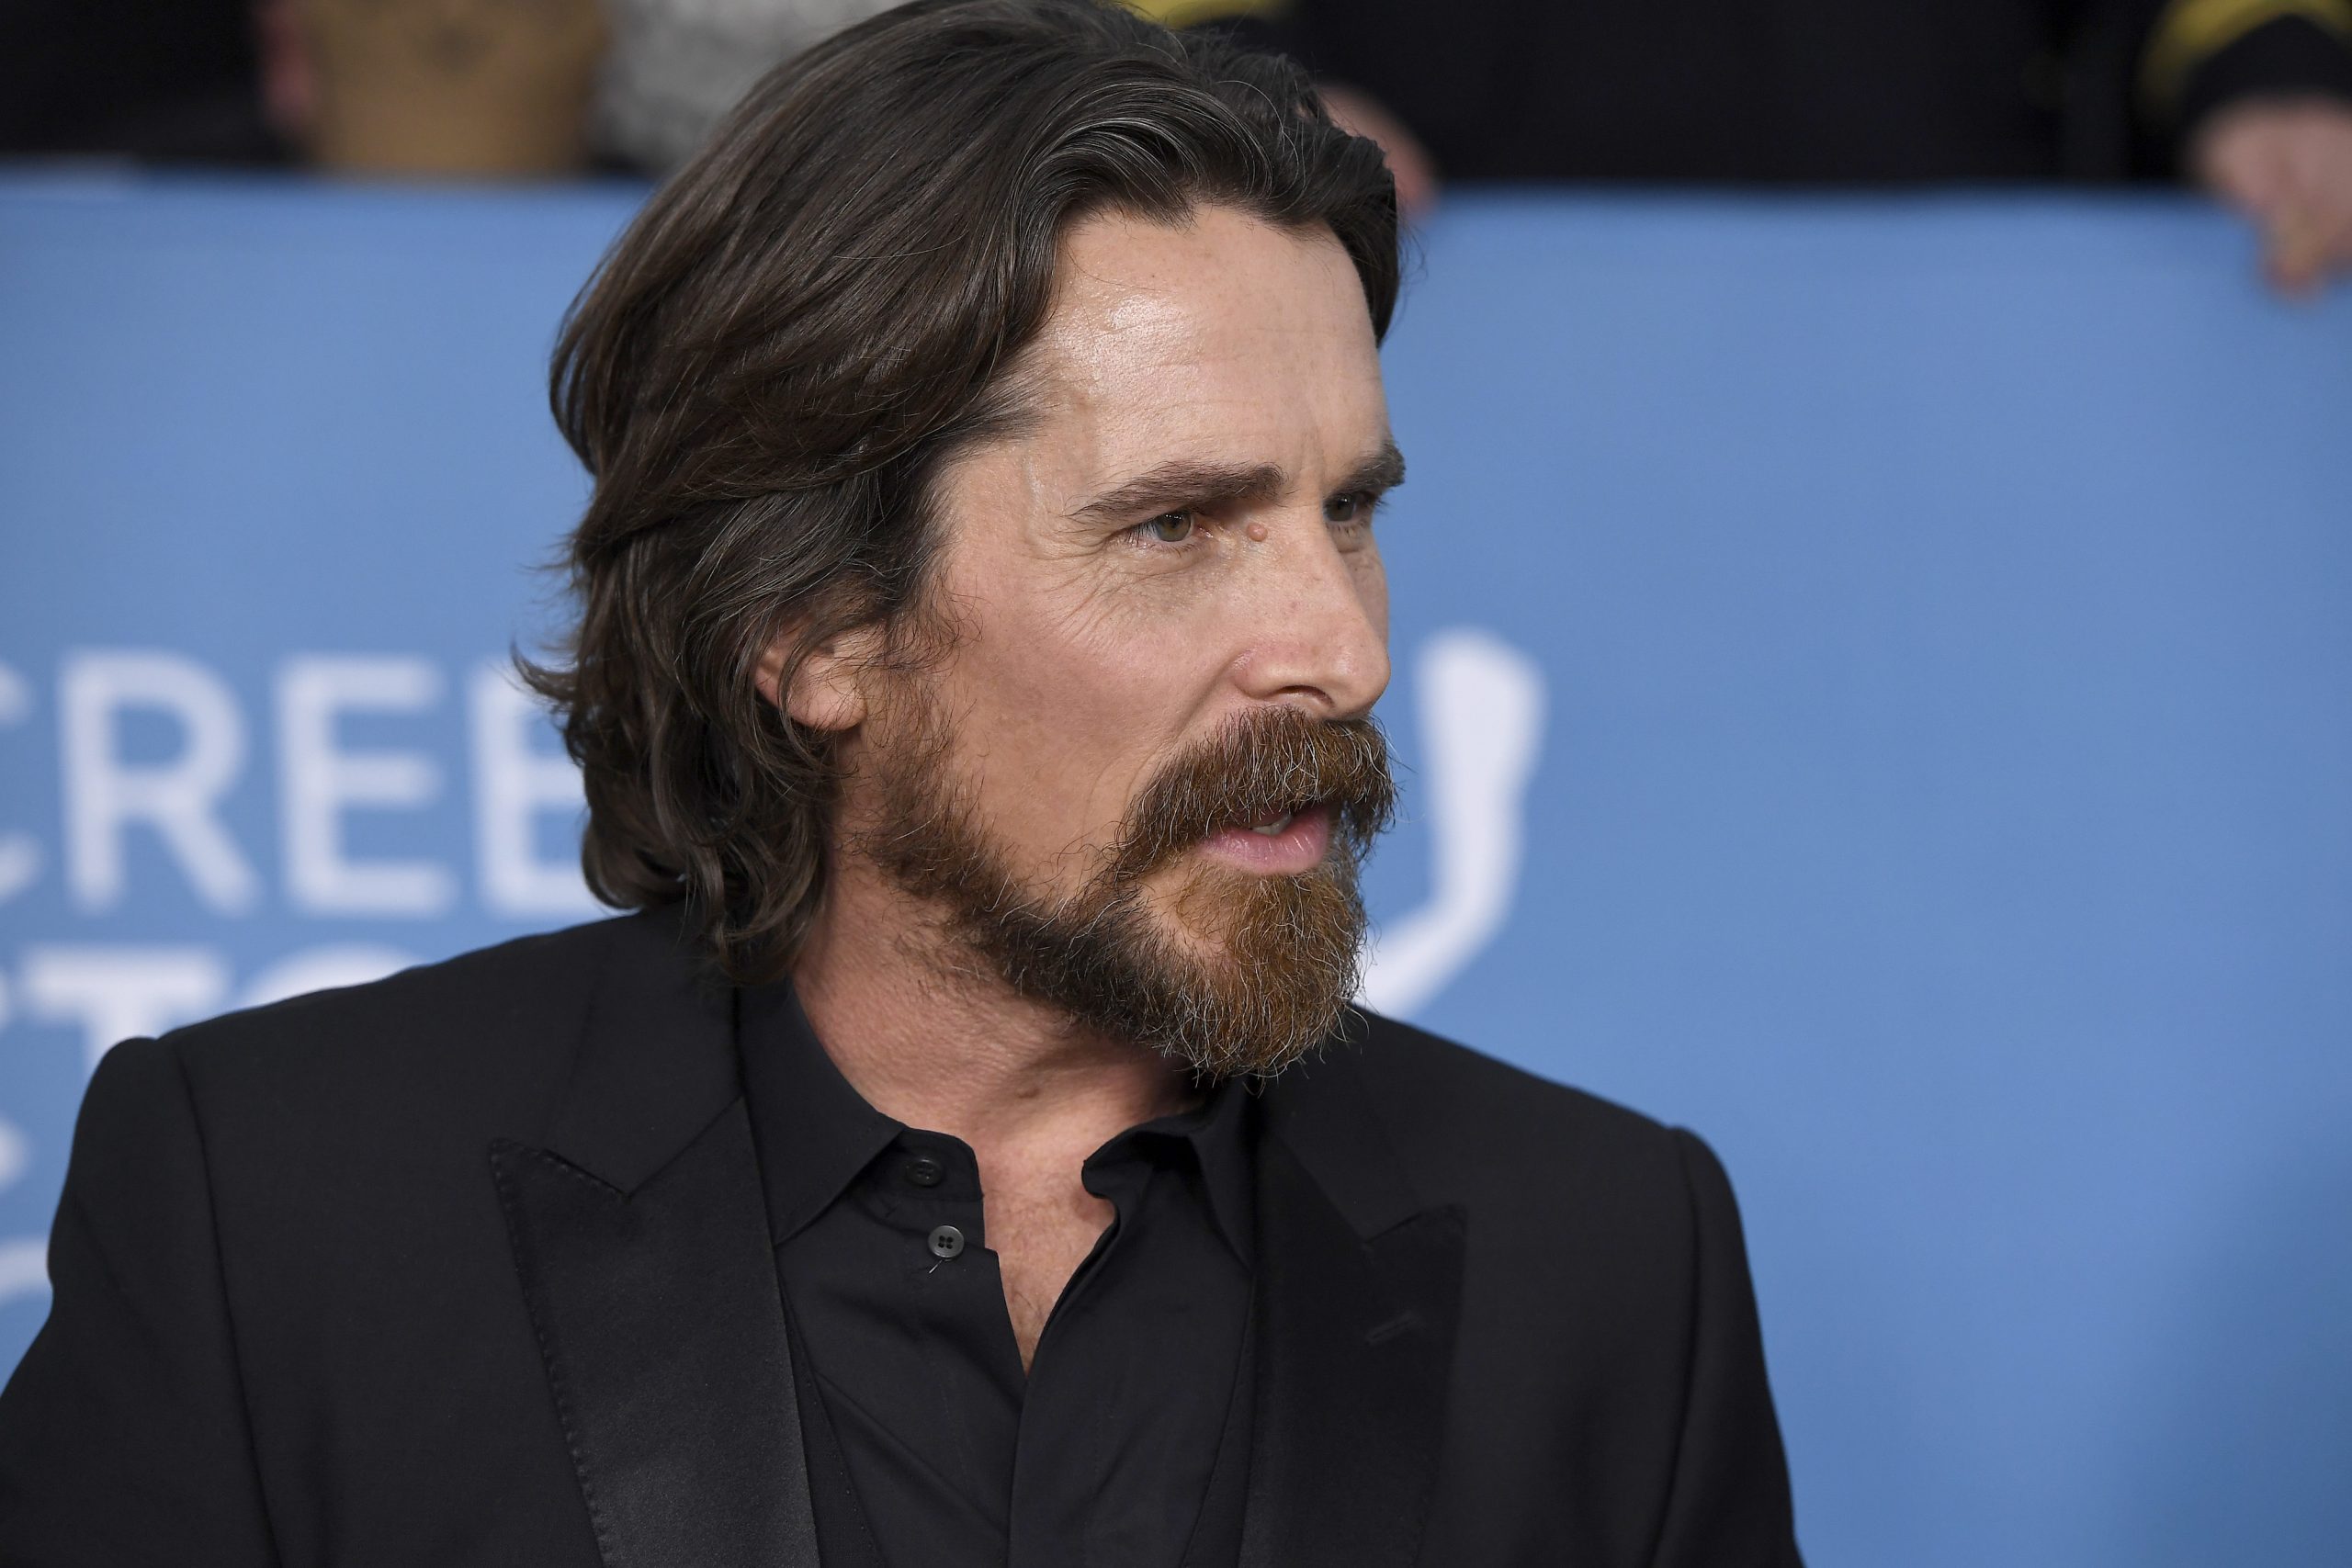 Christian Bale, who stars as Gorr the God Butcher in 'Thor: Love and Thunder,' wears a black suit